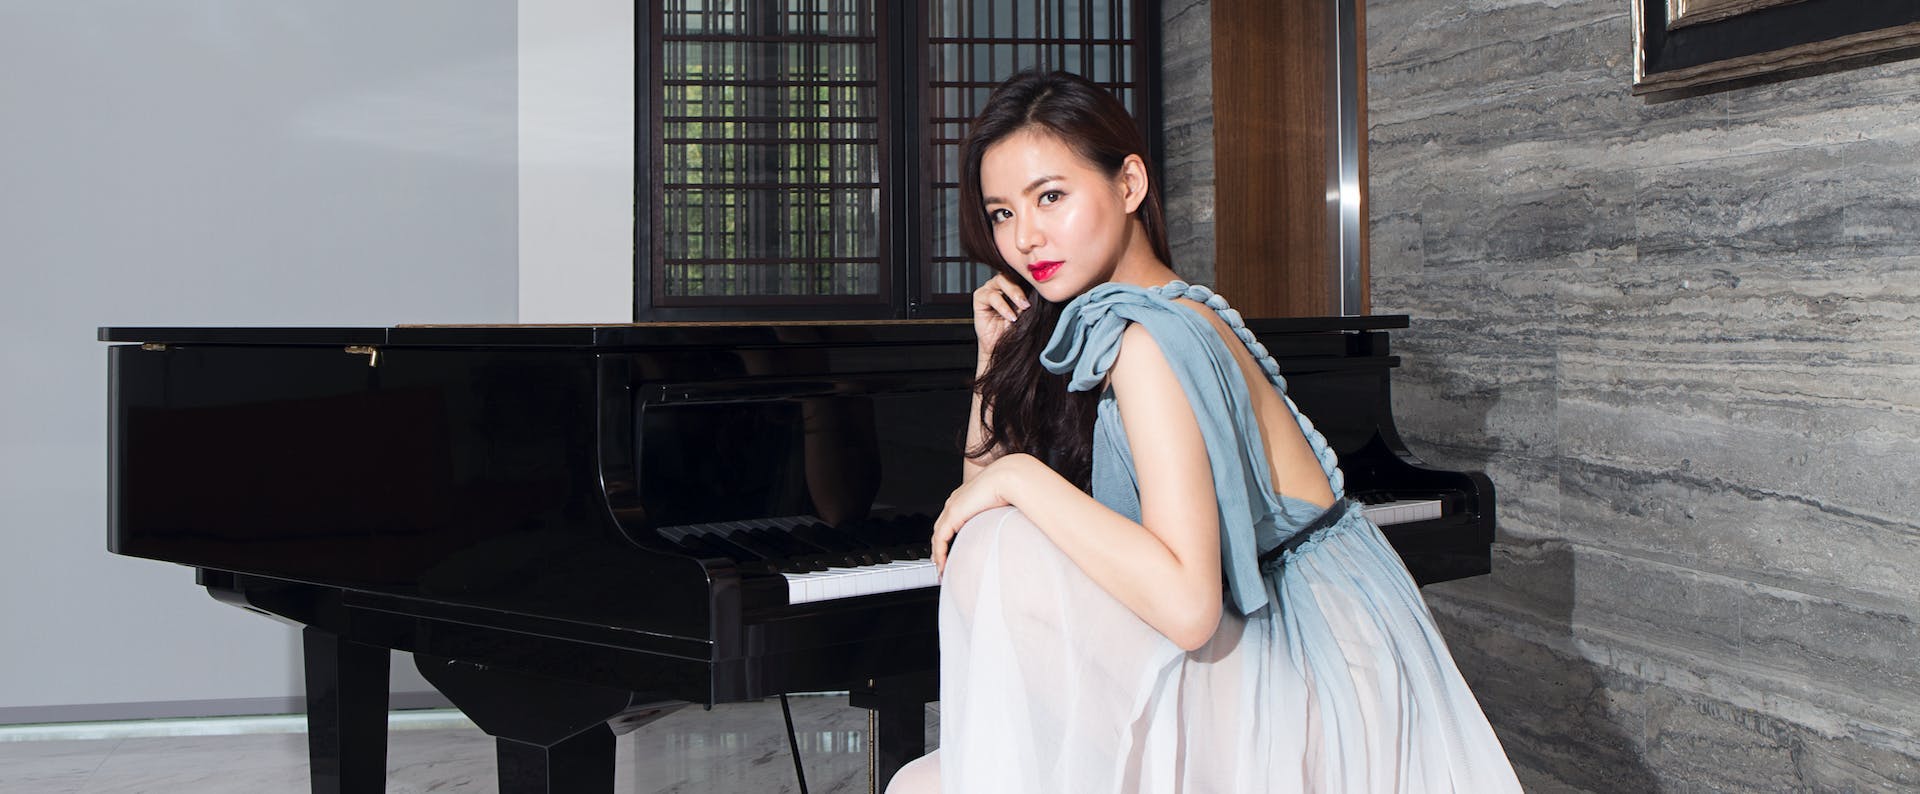 piano musical instrument leisure activities person grand piano evening dress fashion gown clothing performer